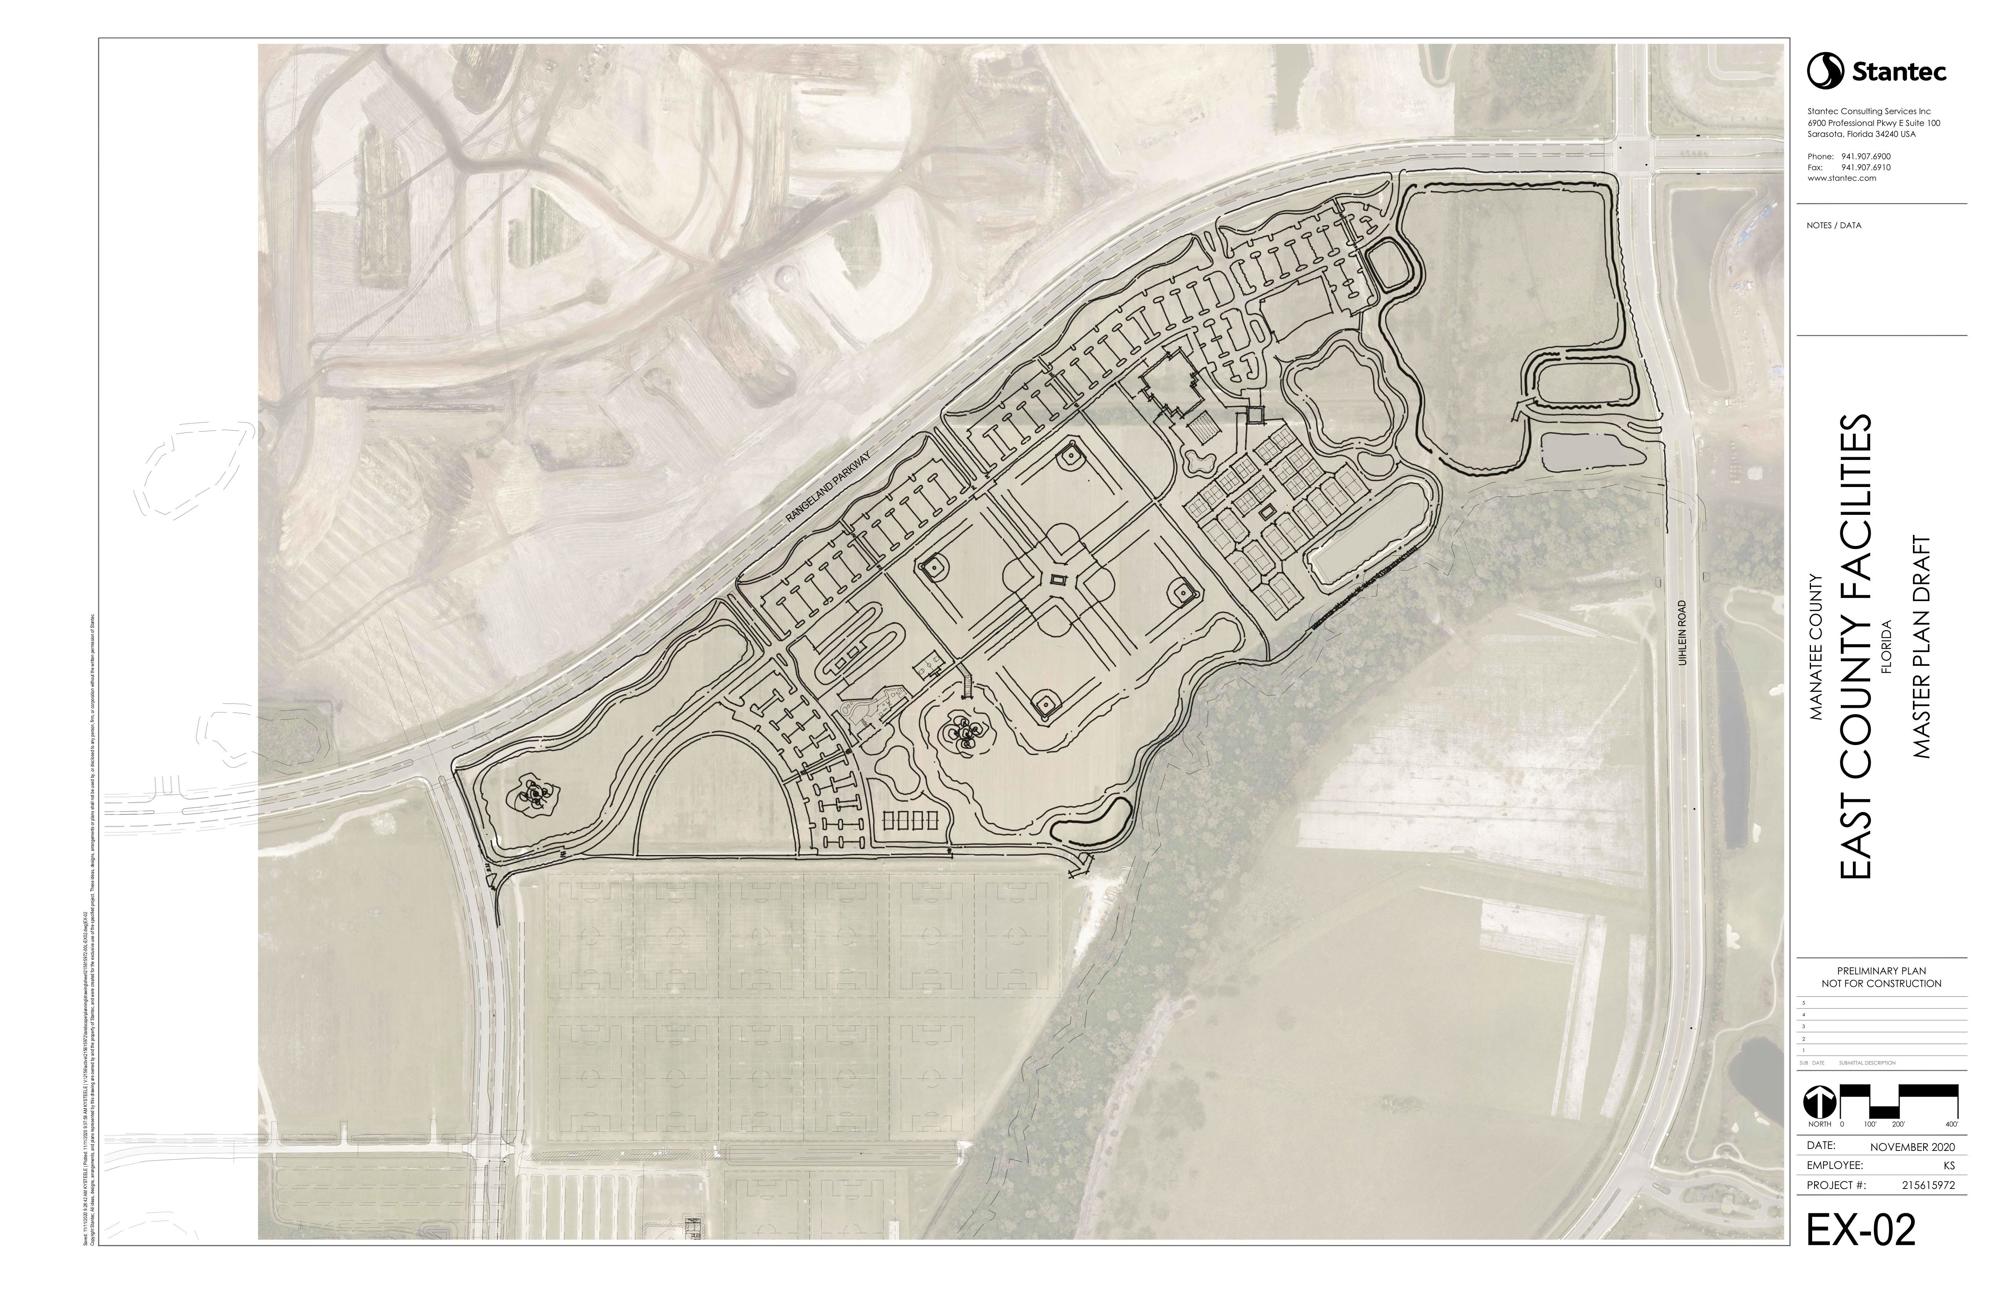 This draft of the general development plan for expansion at Premier Sports Campus is being reviewed based on comments from county staff. It's likely to change before the final result is presented to commissioners and the public.